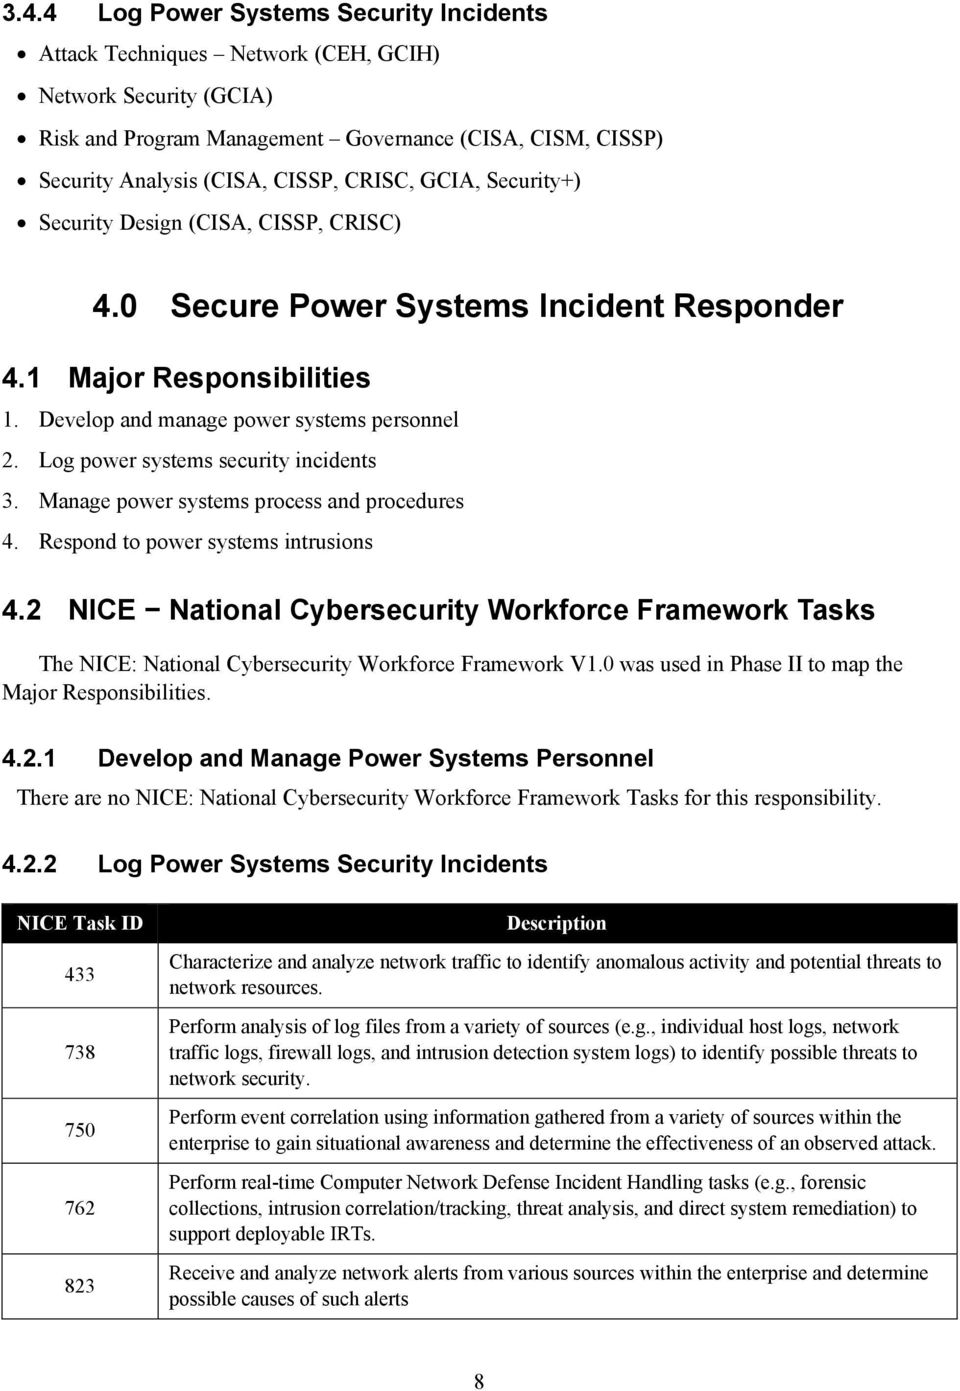 Log power systems security incidents 3. Manage power systems process and procedures 4. Respond to power systems intrusions 4.